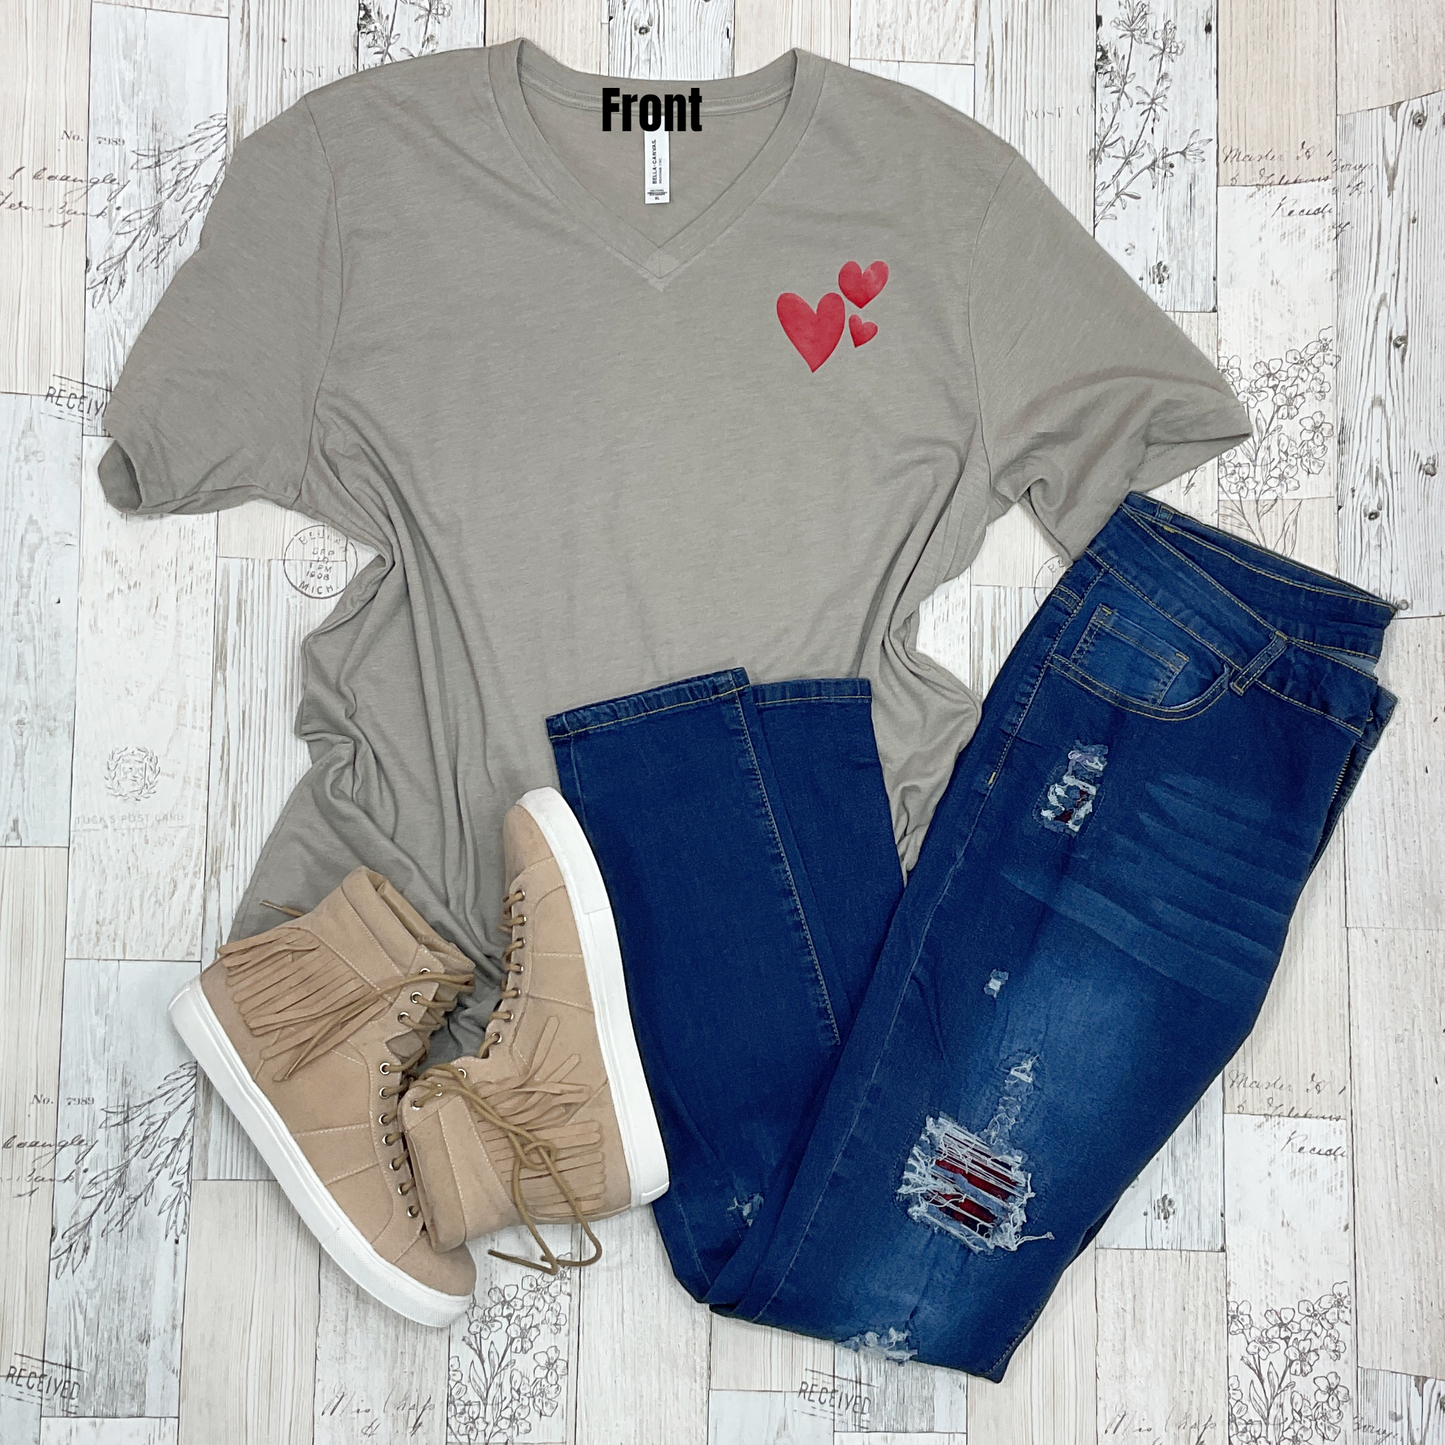 My Heart Graphic Tee - Sassy Chick Clothing